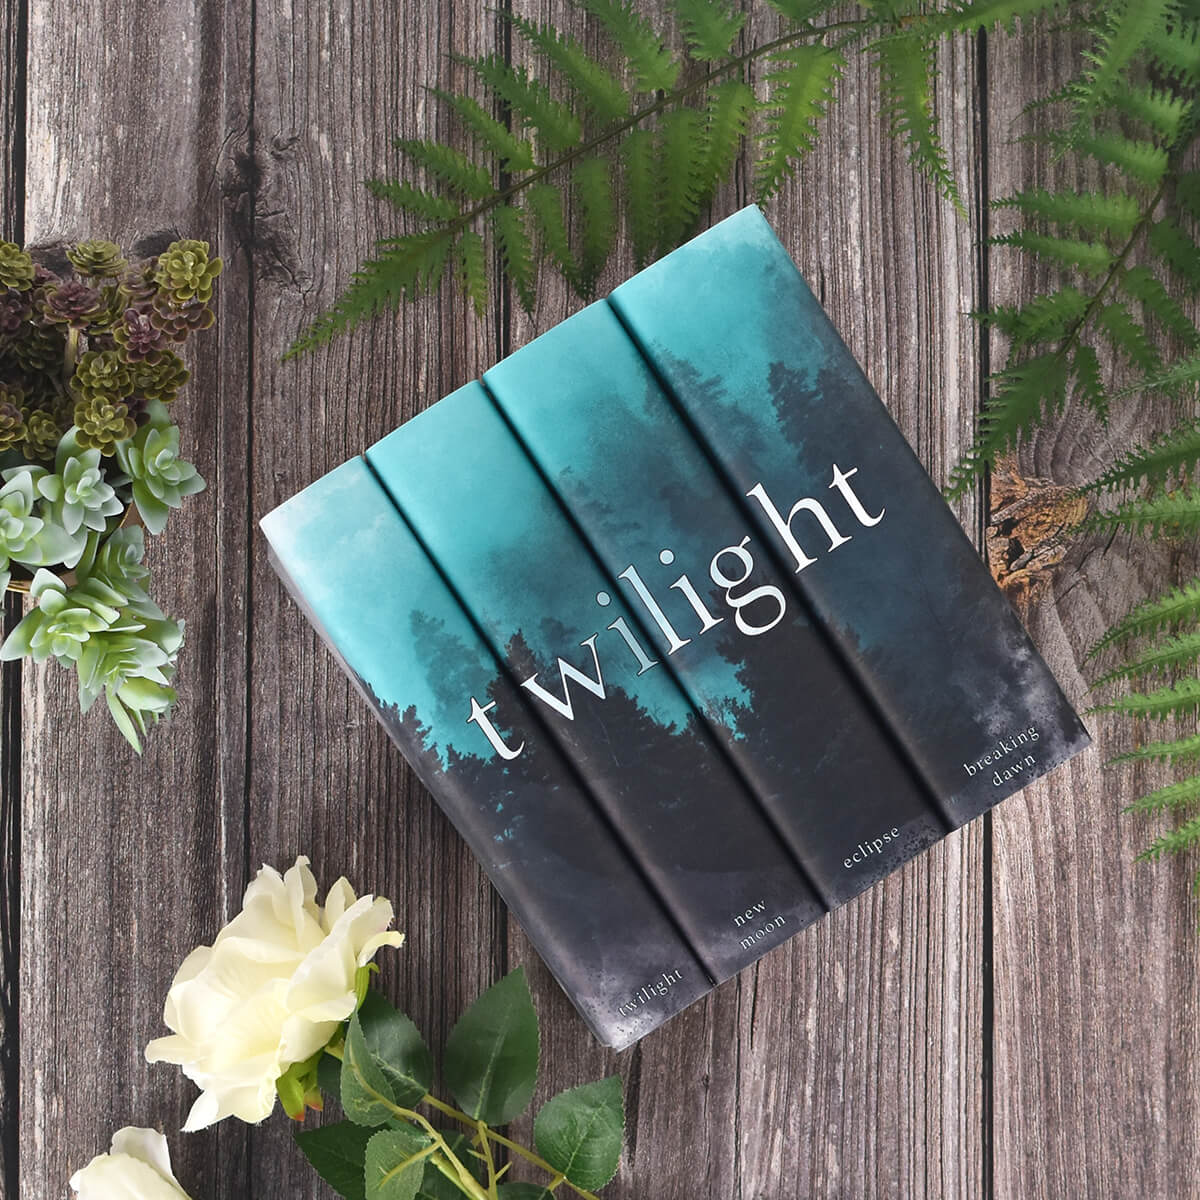 Twilight Four book set sitting against distressed wood surrounded by ferns, succulents, and ferns.